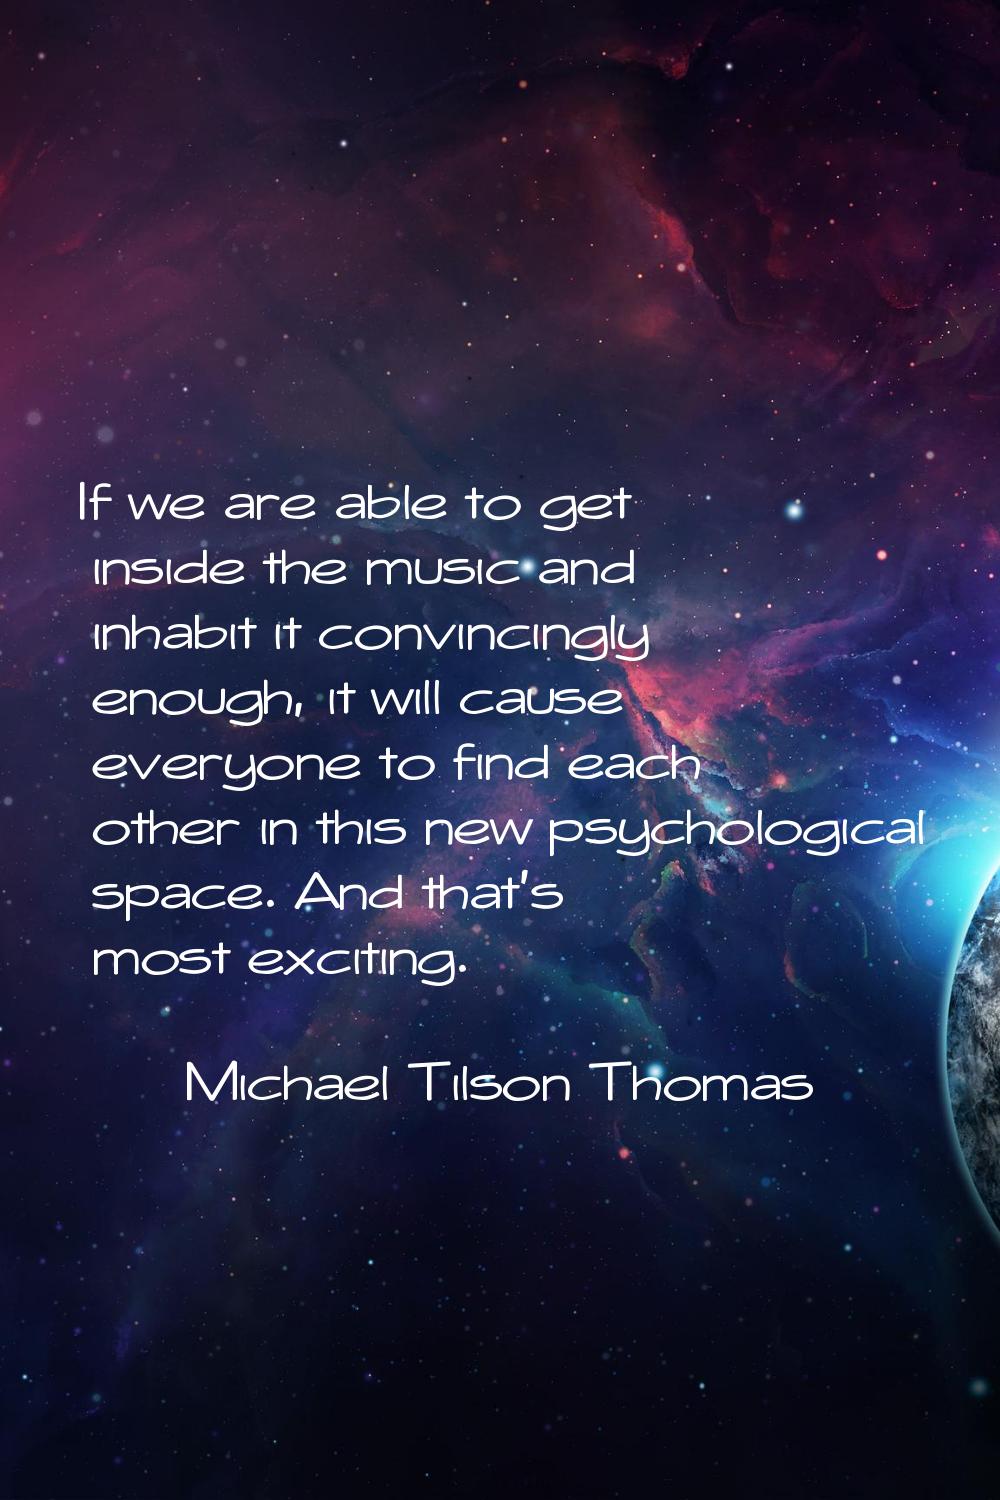 If we are able to get inside the music and inhabit it convincingly enough, it will cause everyone t